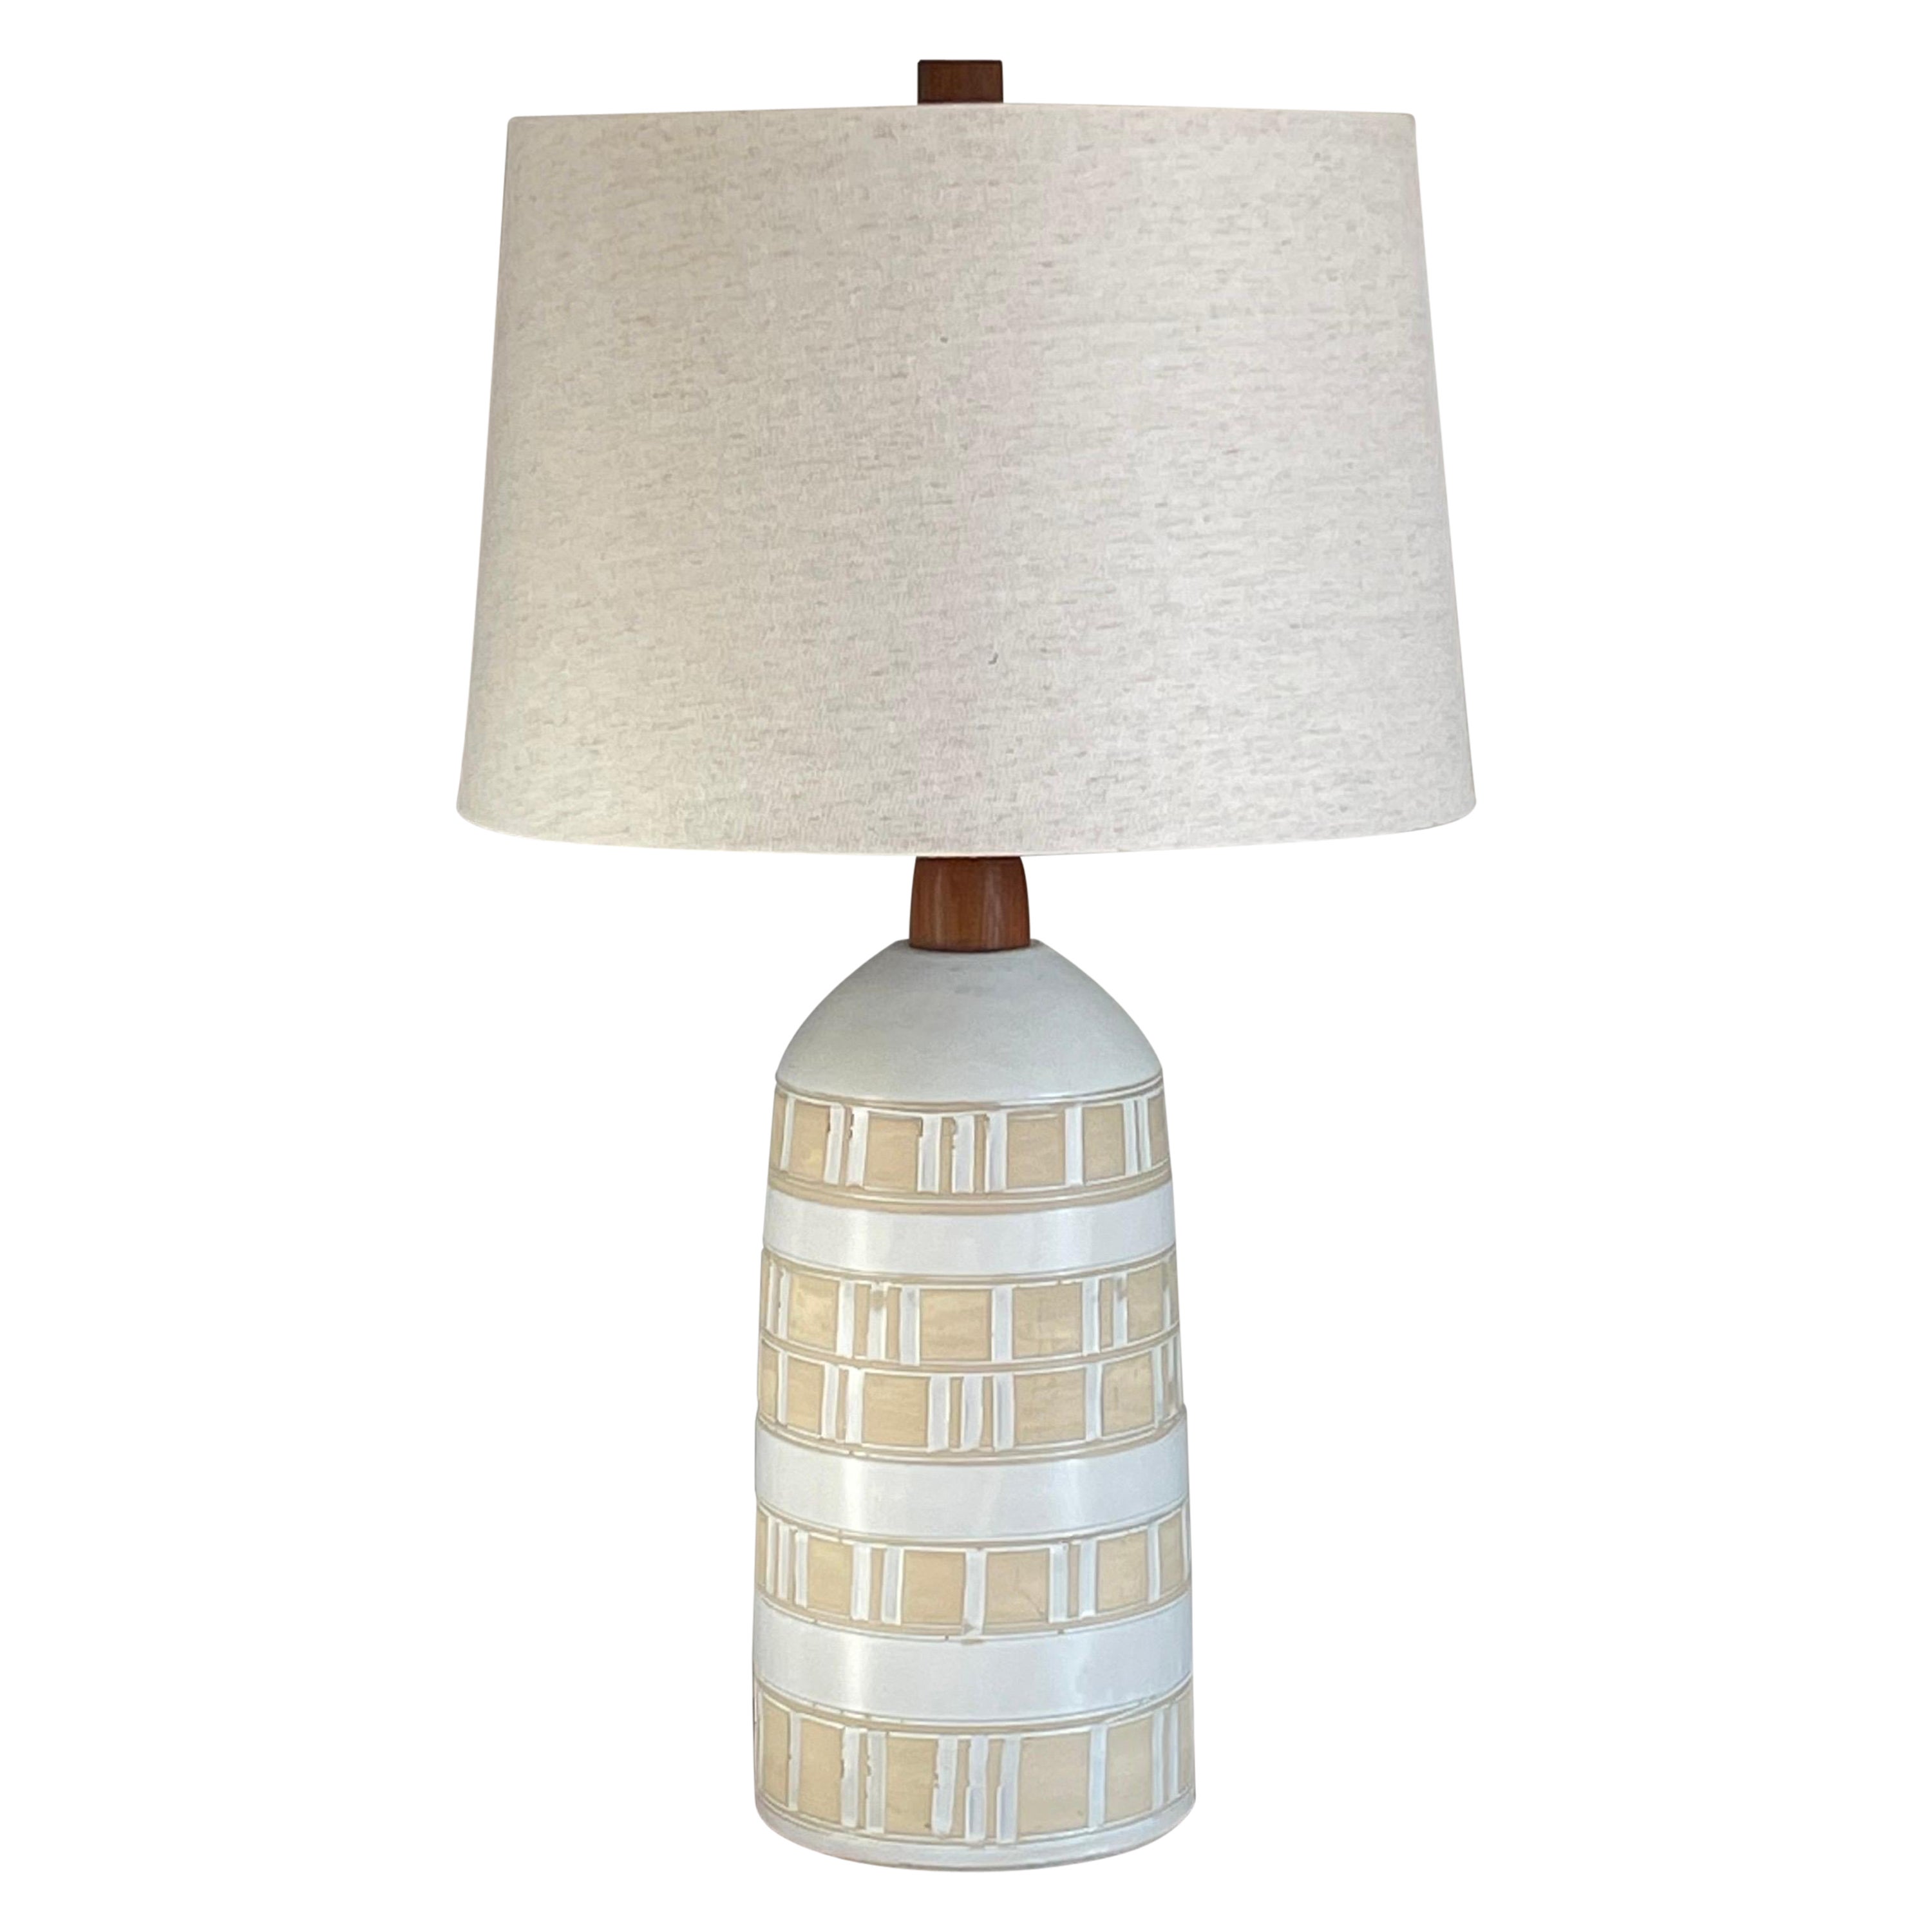 Jane and Gordon Martz Large Table Lamp, Ceramic and Walnut For Sale